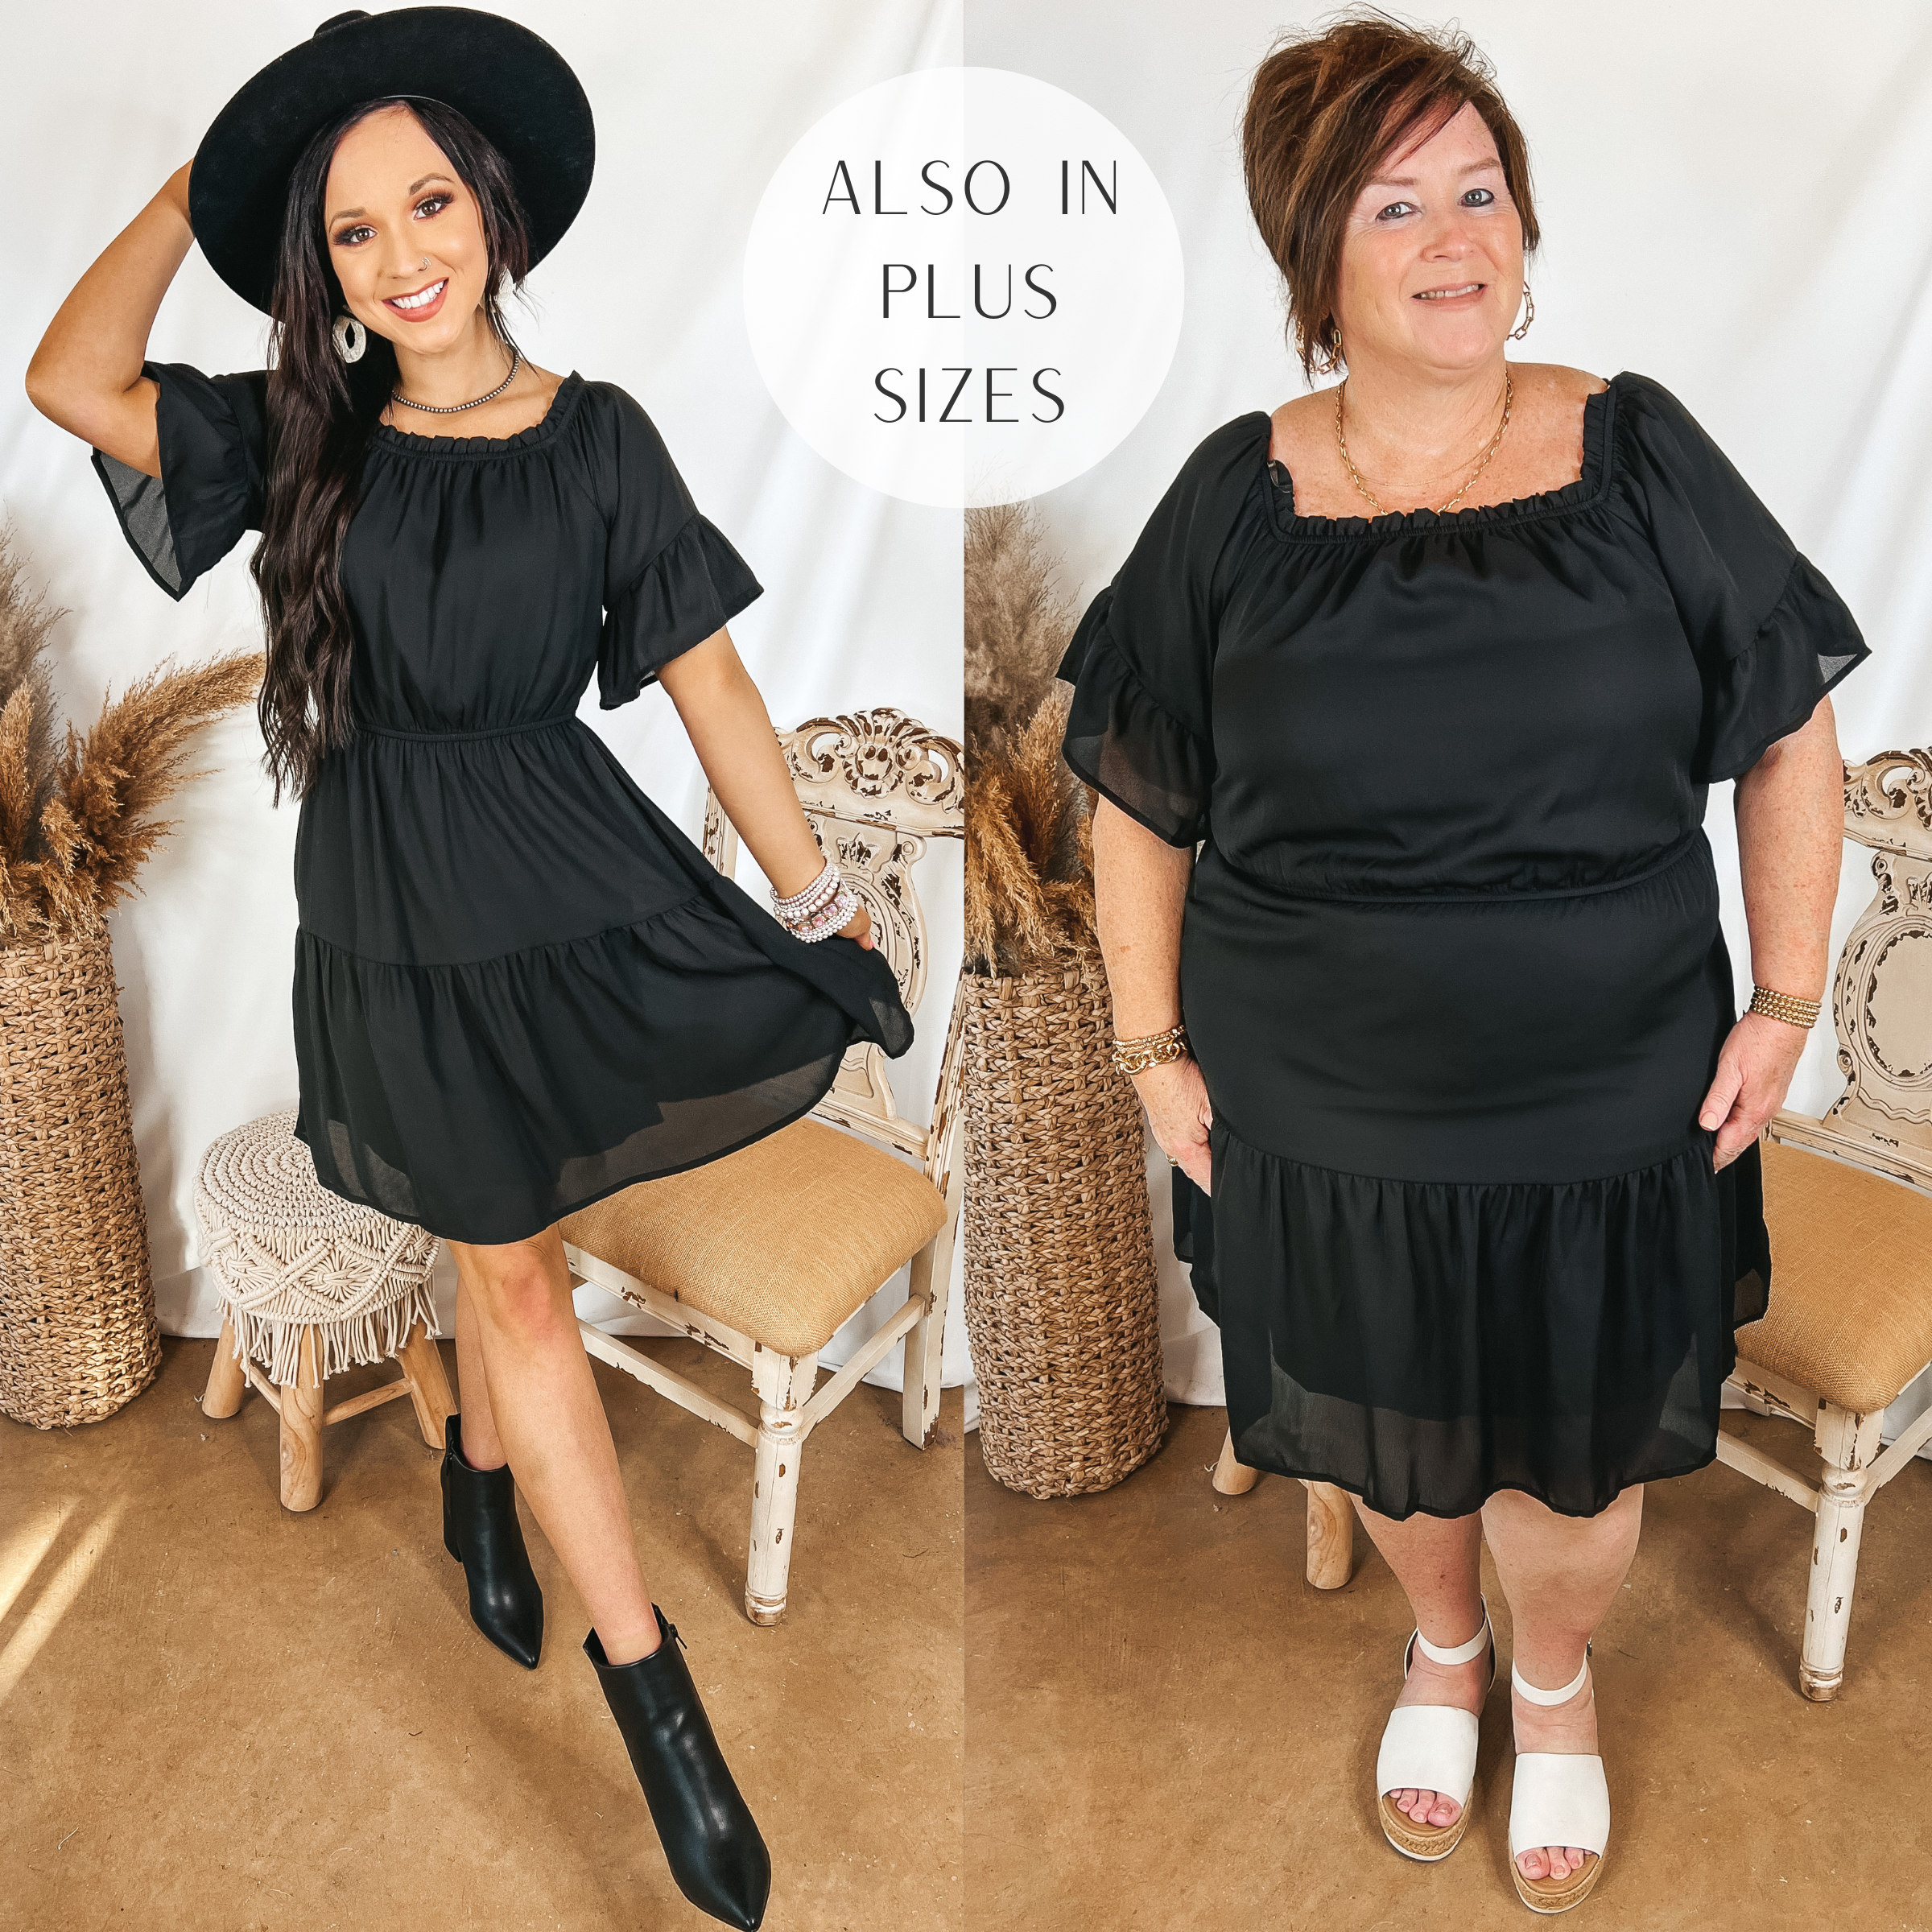 Models are wearing a black off the shoulder dress that is knee length. Size small model has it paired with black booties and a black hat. Plus size model has it paired with white sandals and gold jewelry.